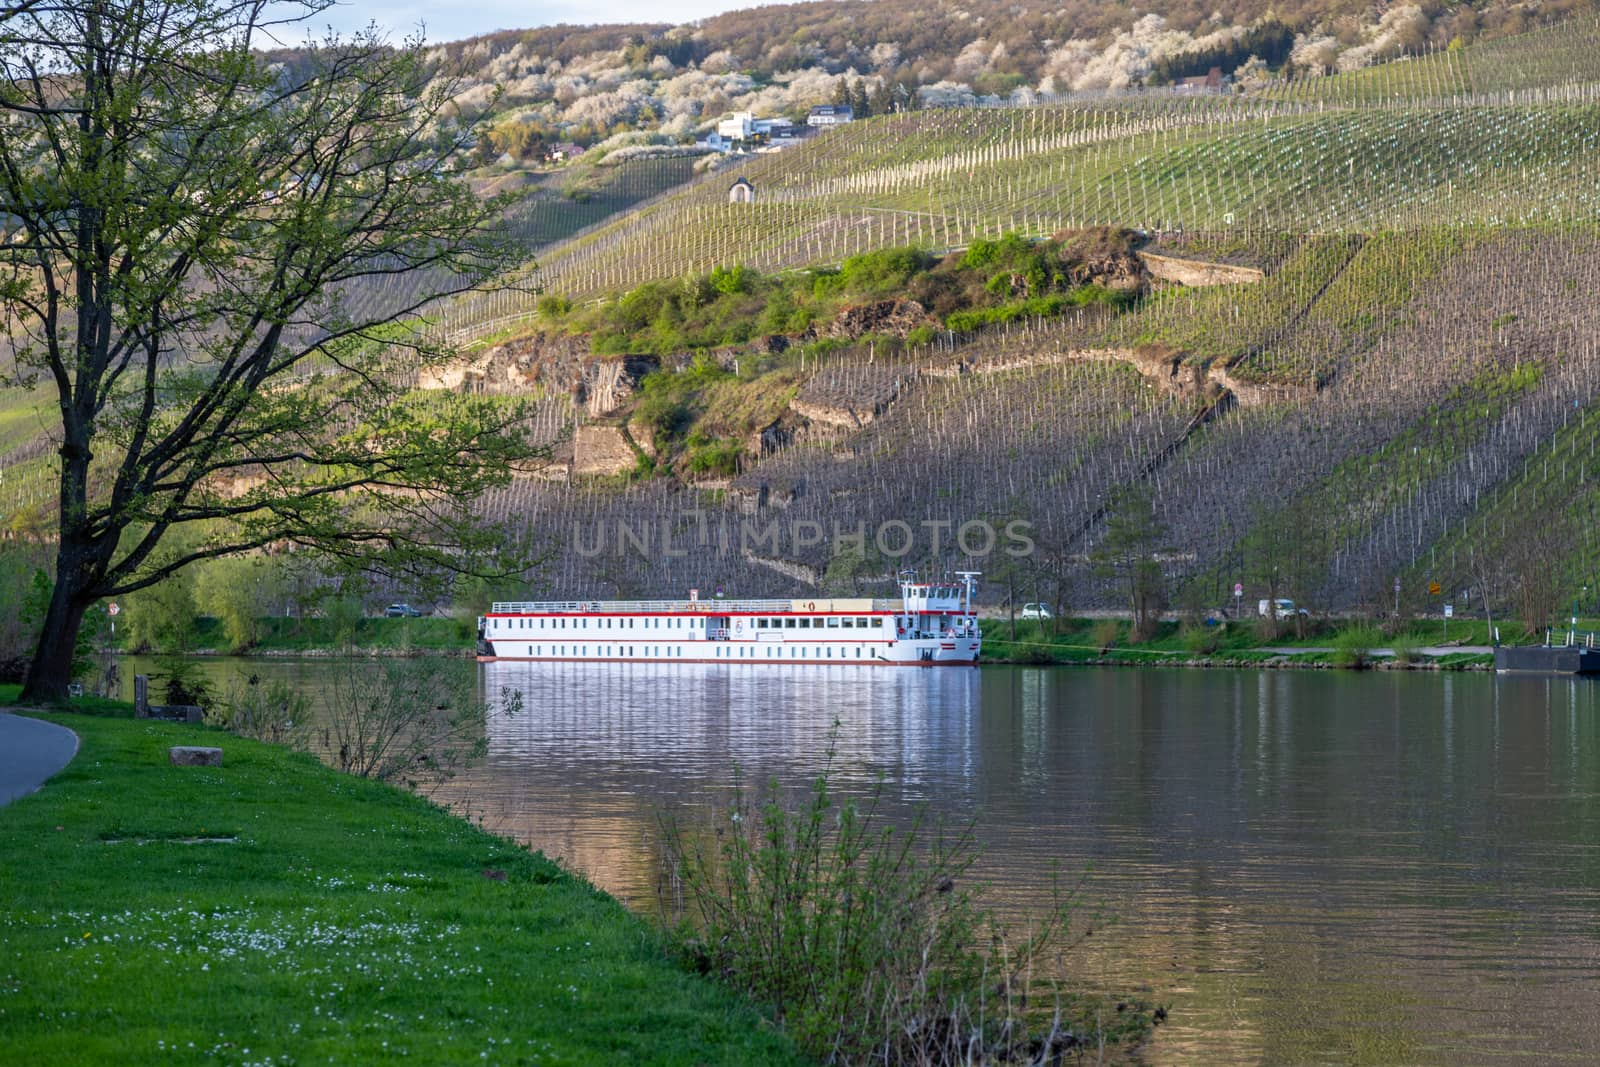 Bernkastel-Kues at river Moselle, Germany by reinerc